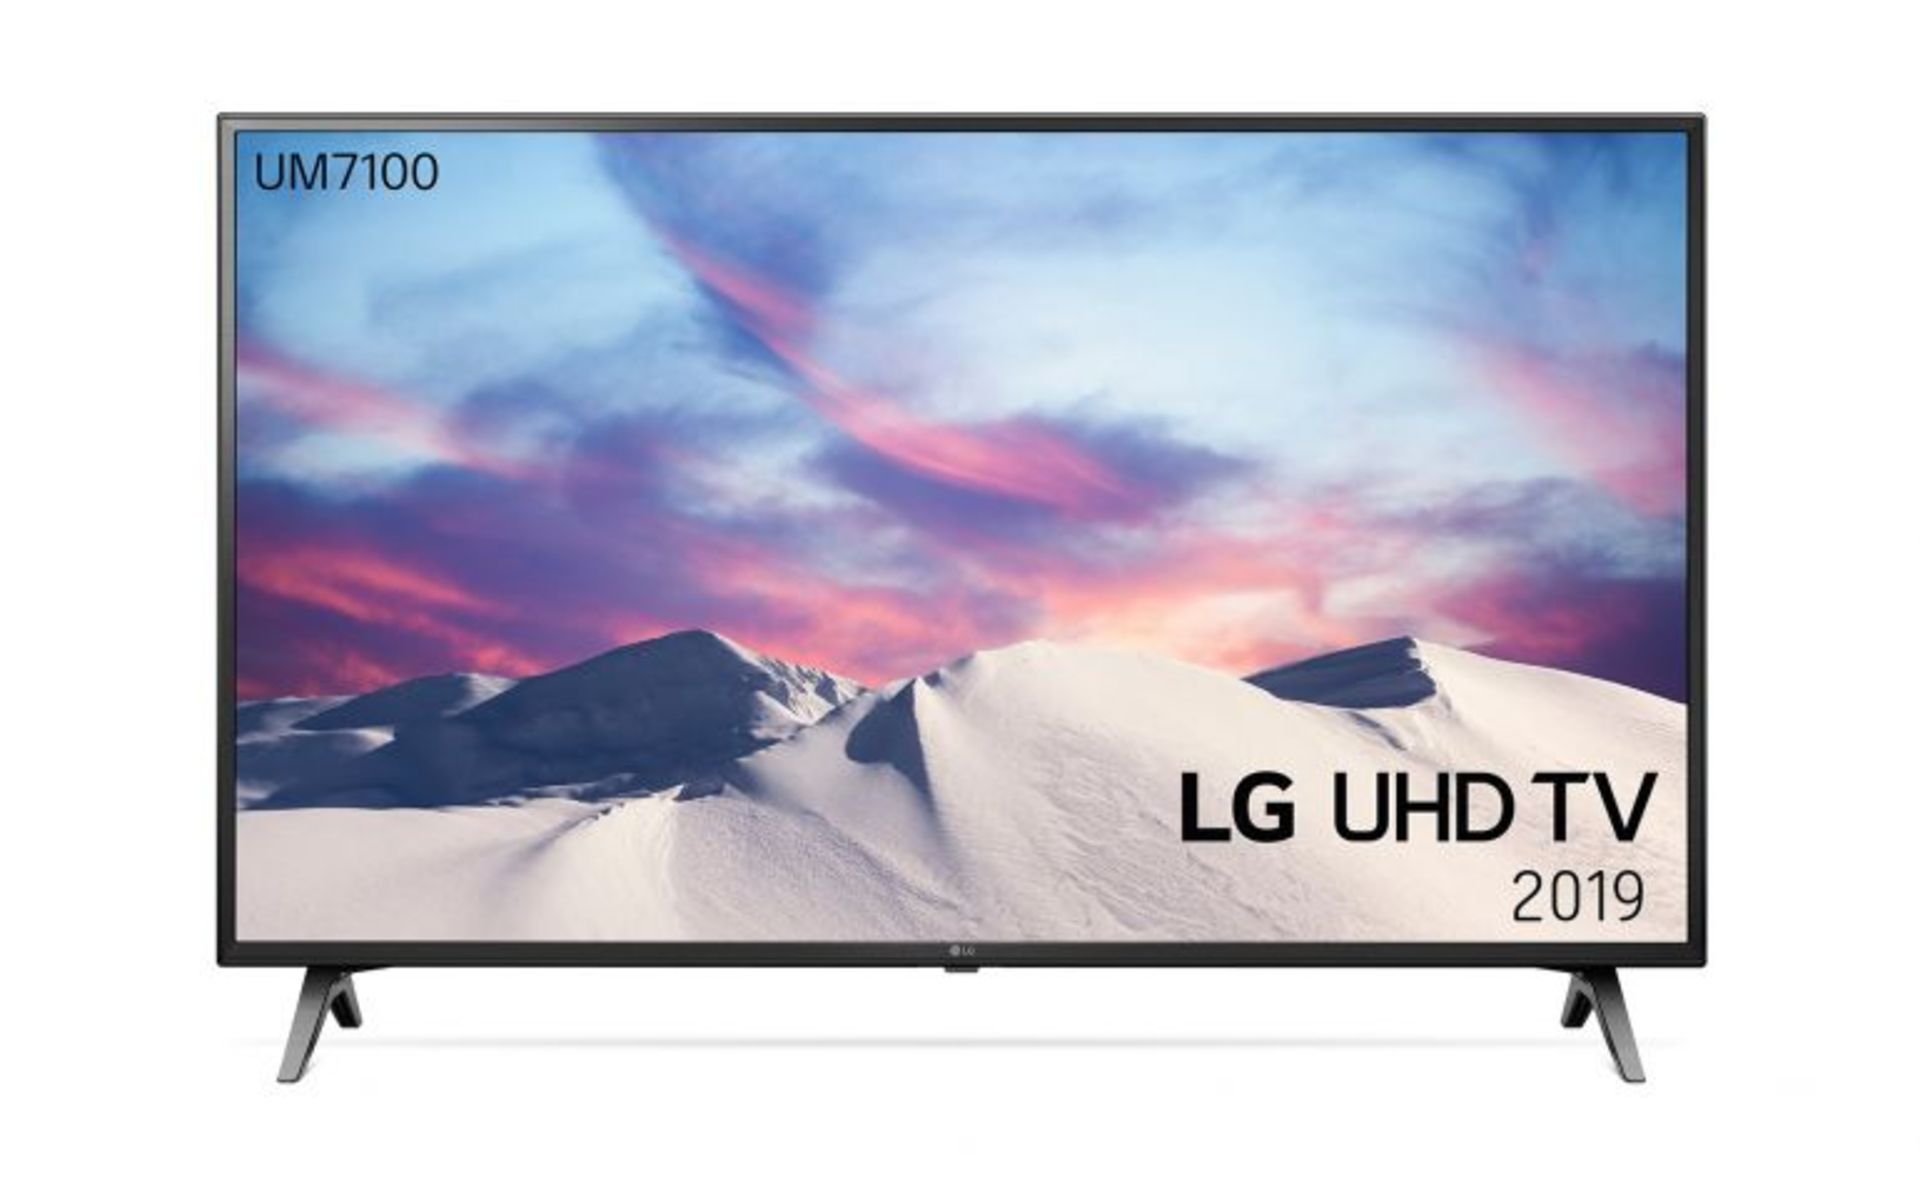 V Grade A LG 49 Inch ACTIVE HDR 4K ULTRA HD LED SMART TV WITH FREEVIEW HD & WEBOS & WIFI - AI TV